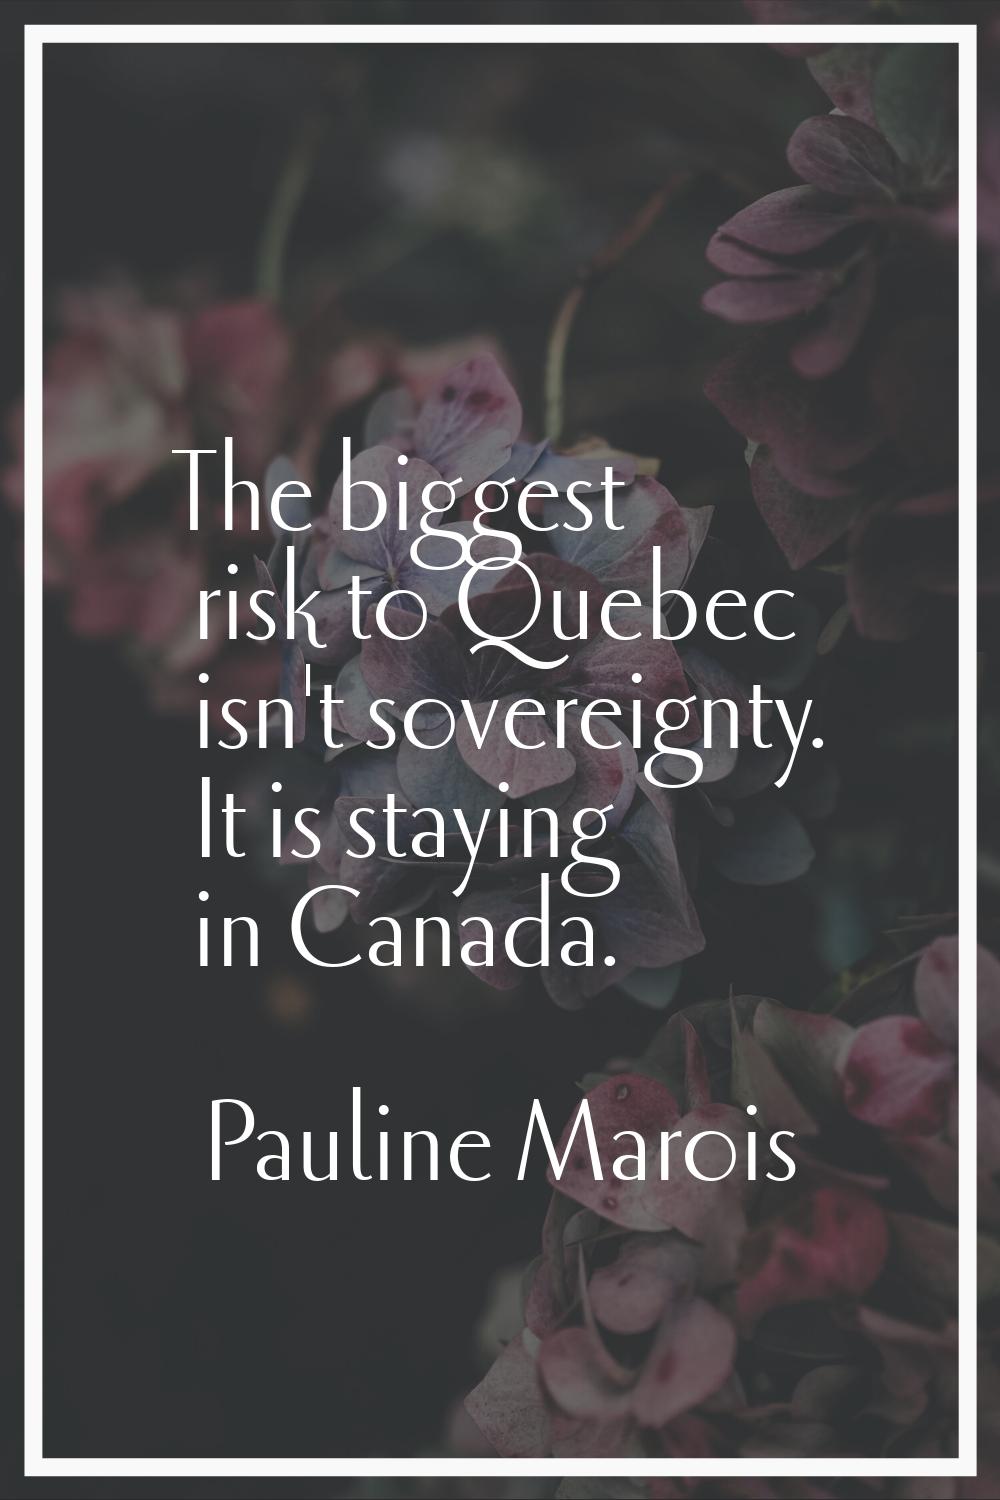 The biggest risk to Quebec isn't sovereignty. It is staying in Canada.